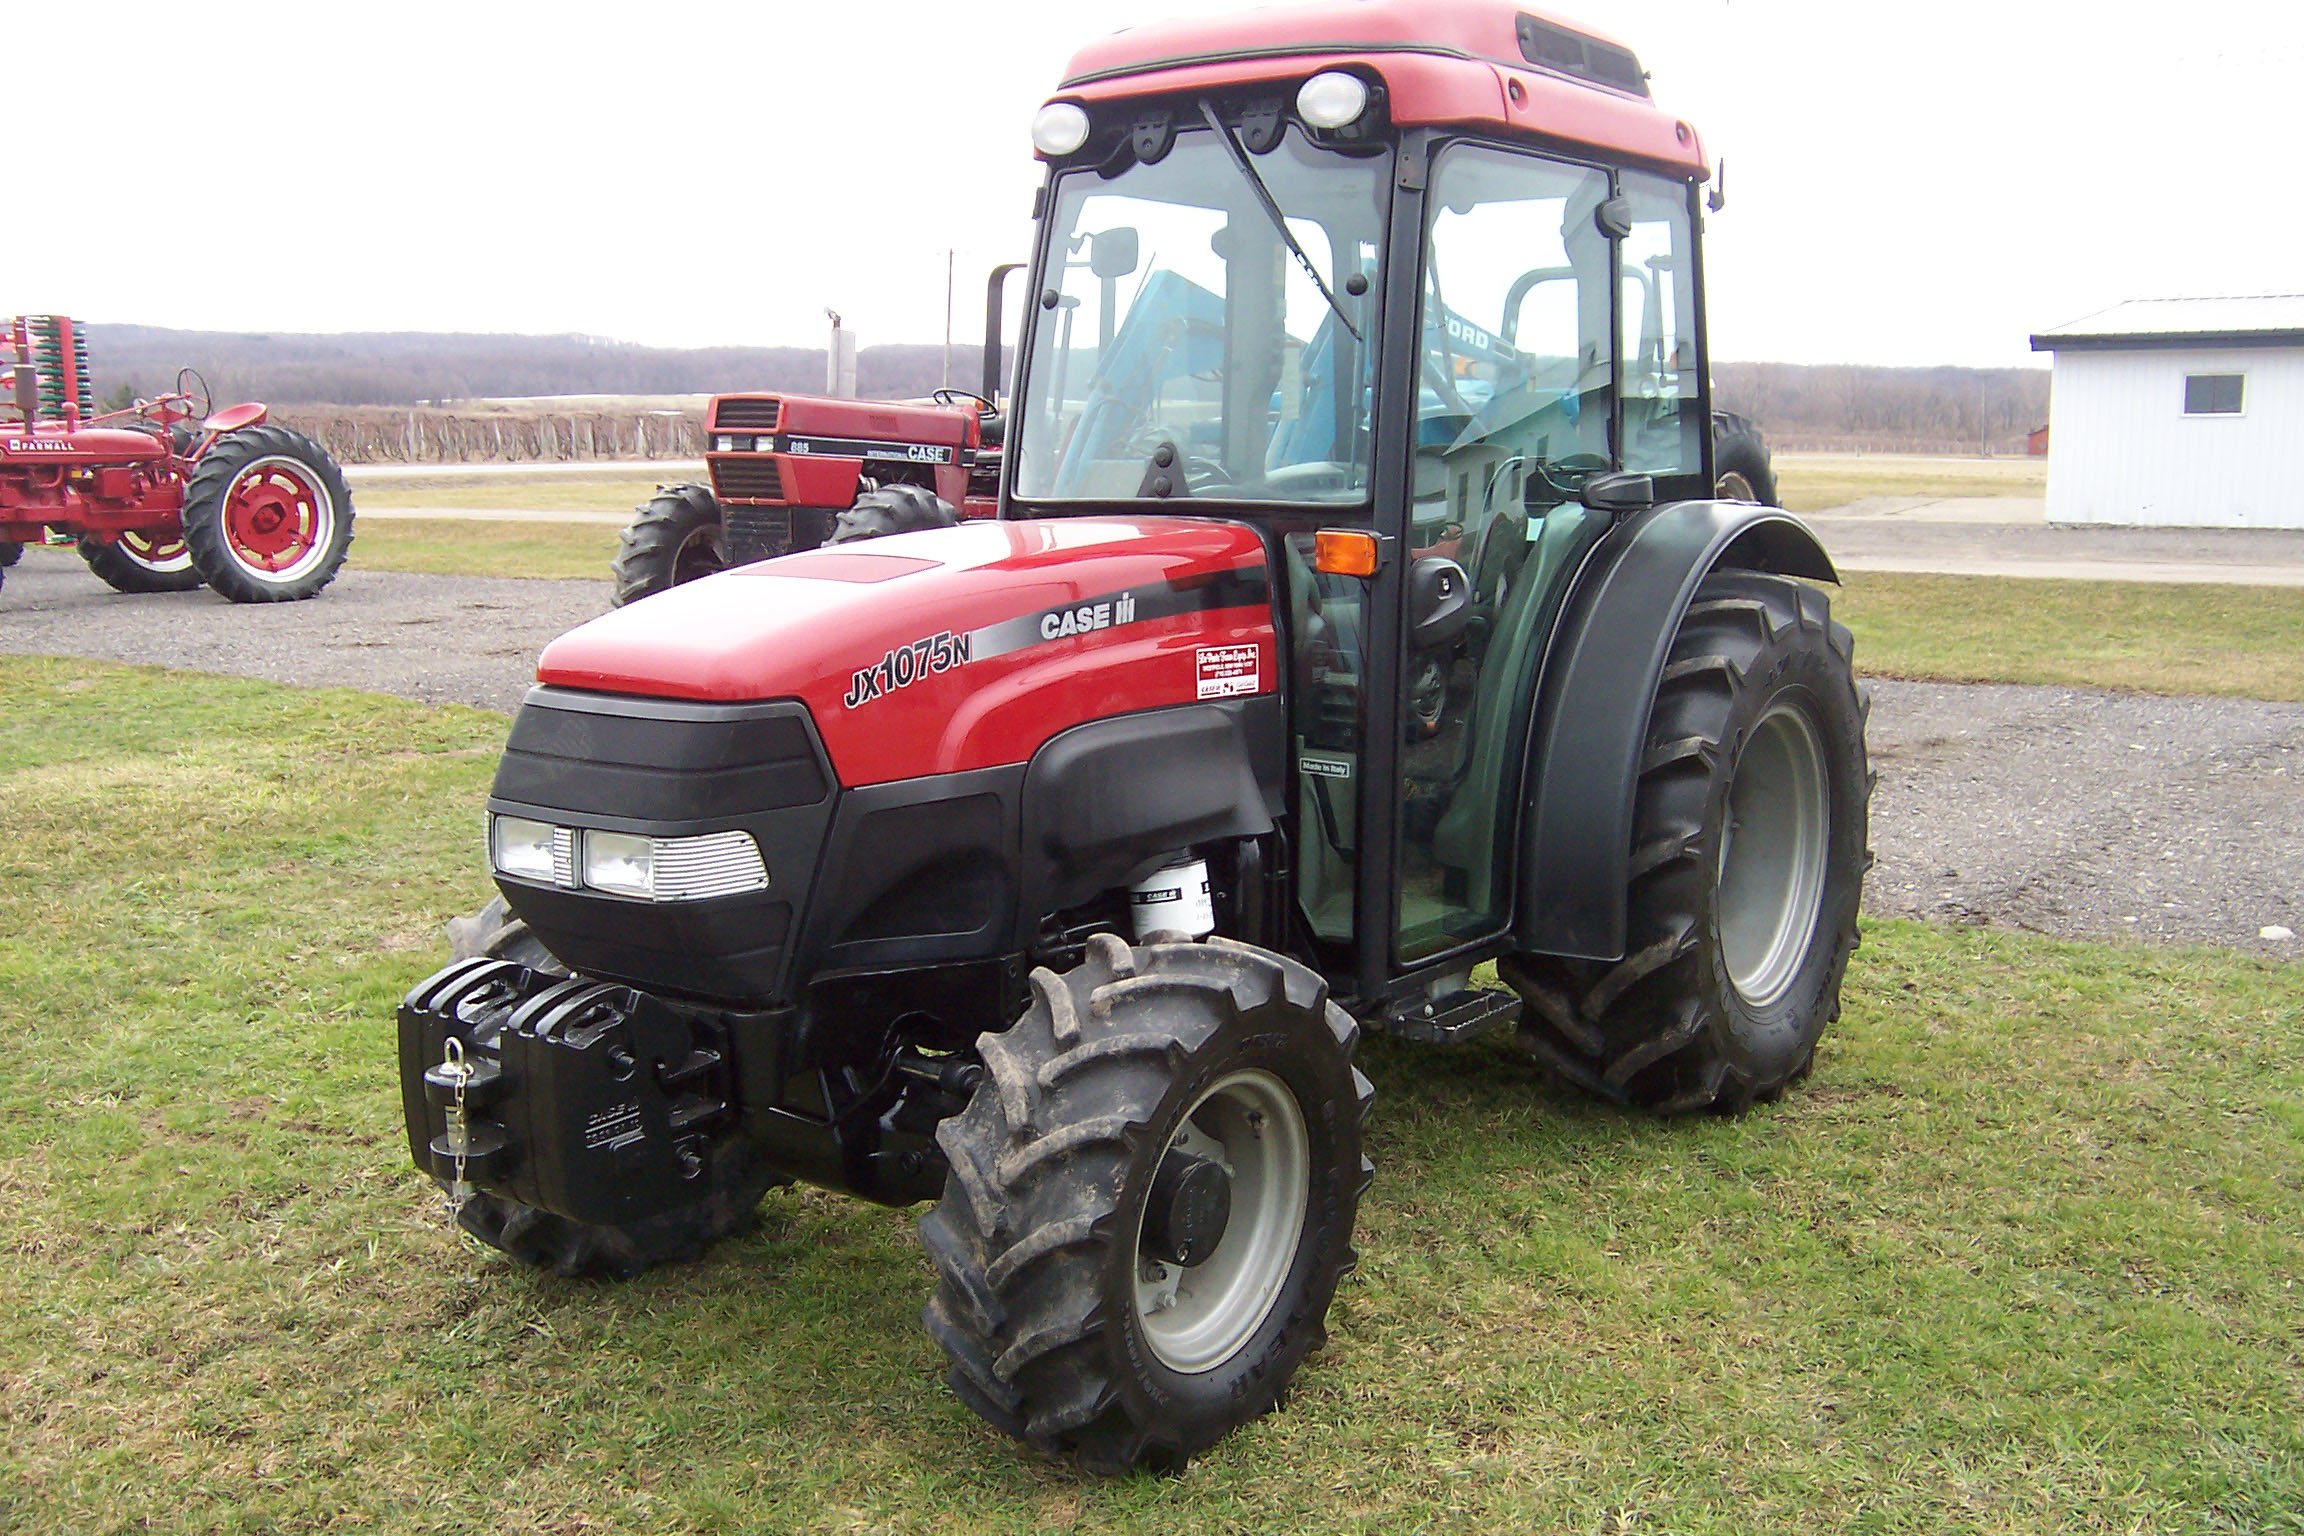 Used Tractor CaseIH JX1075N for sale